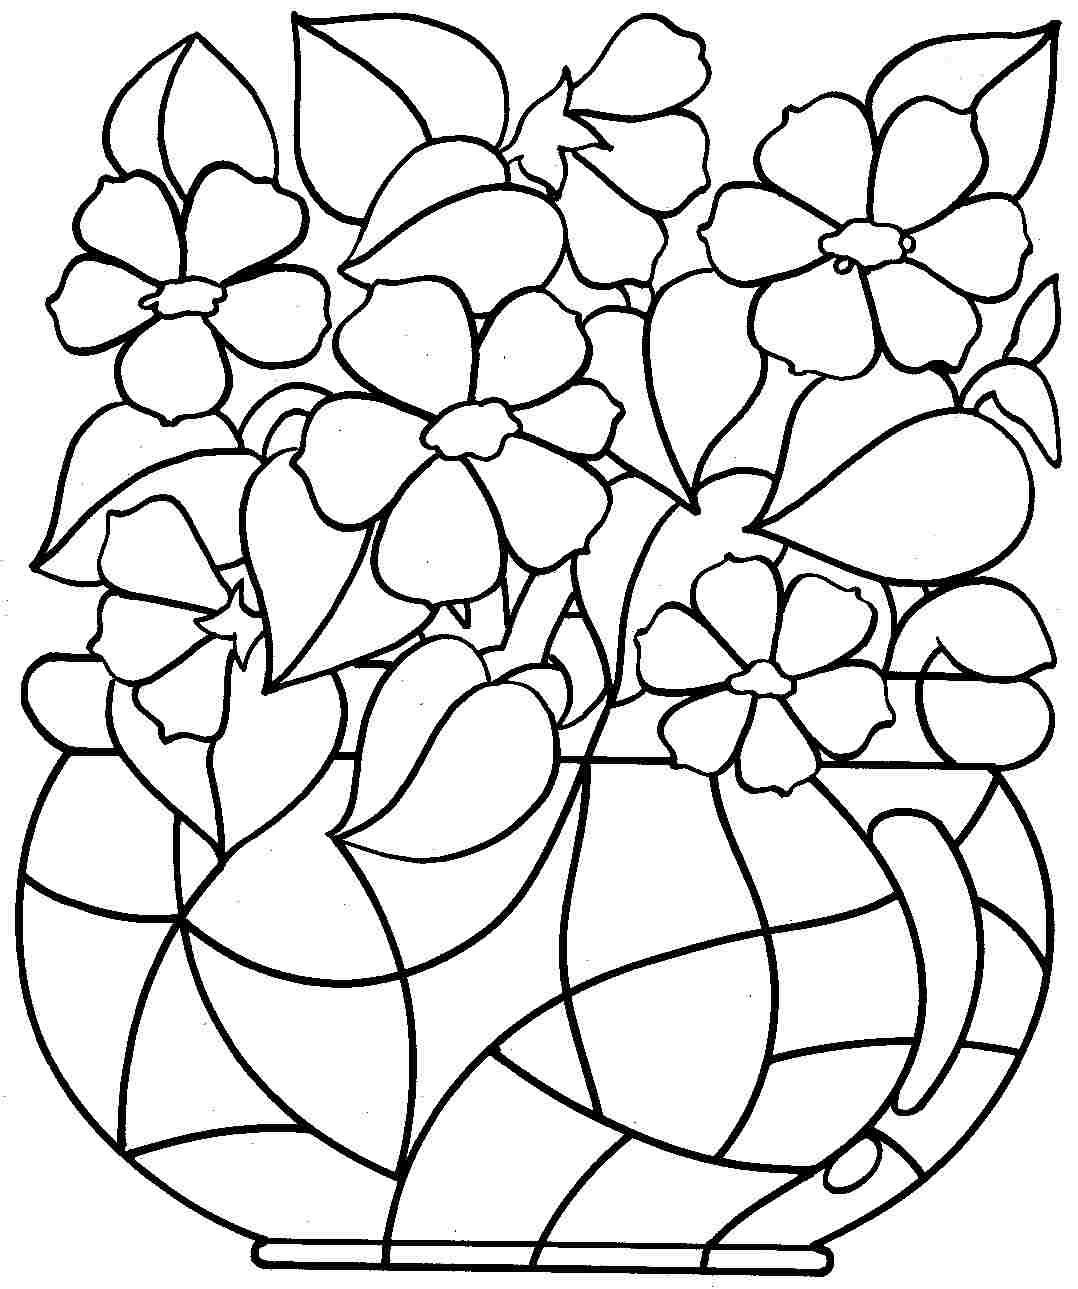 Coloring Ideas : Coloring Ideas Adult Pages Spring Fabulous Free - Free Printable Spring Coloring Pages For Adults